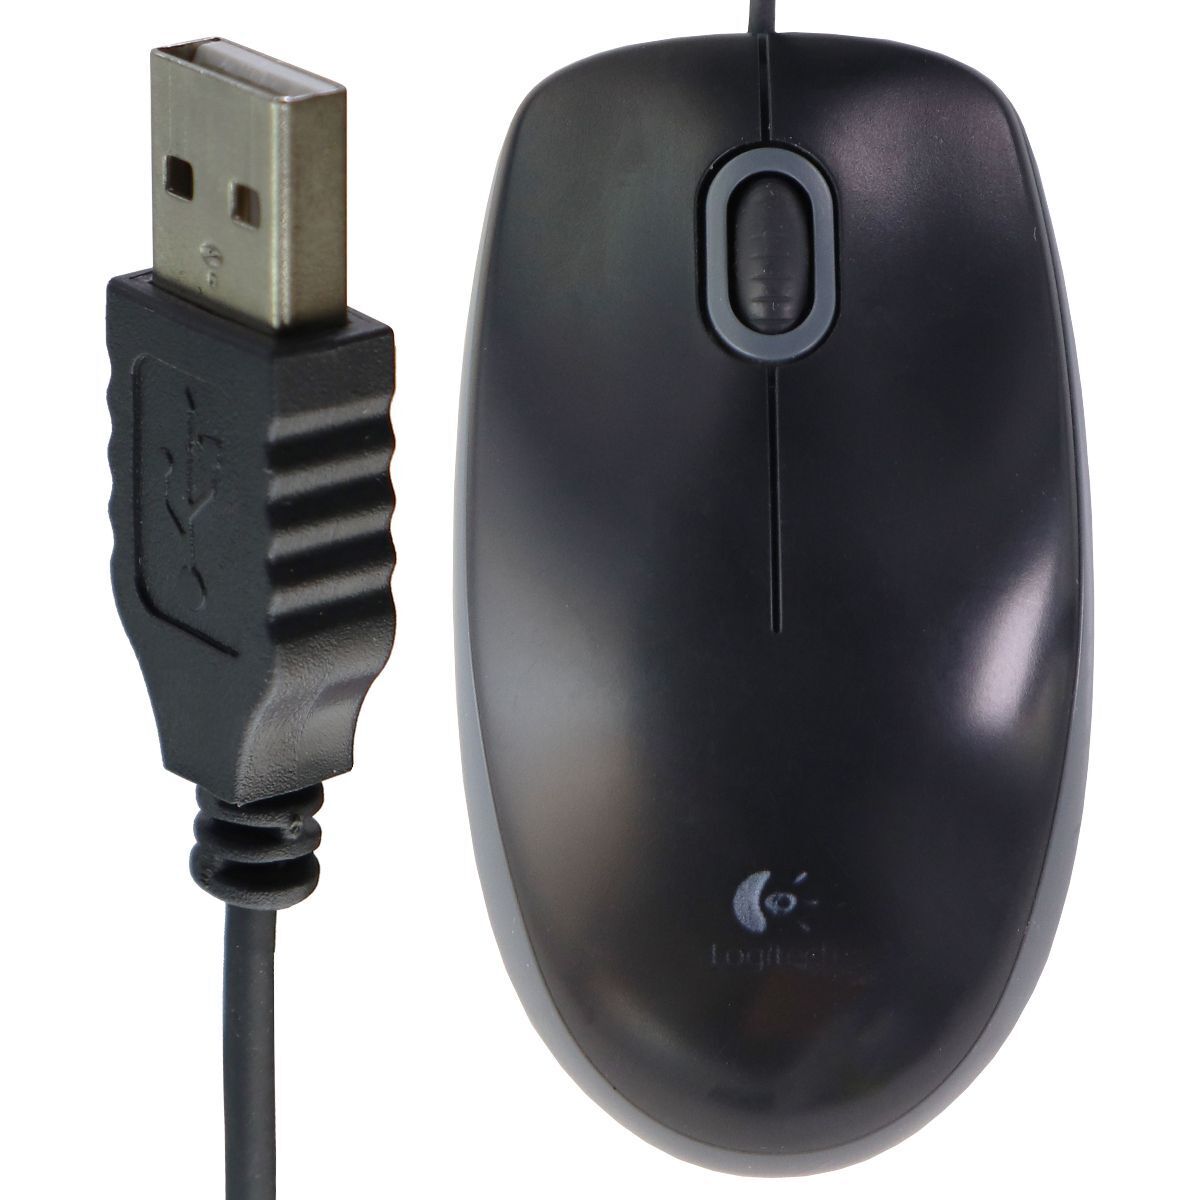 Logitech Wired USB Optical Mouse for Windows PC & More (M-U0026) - Black/Grey